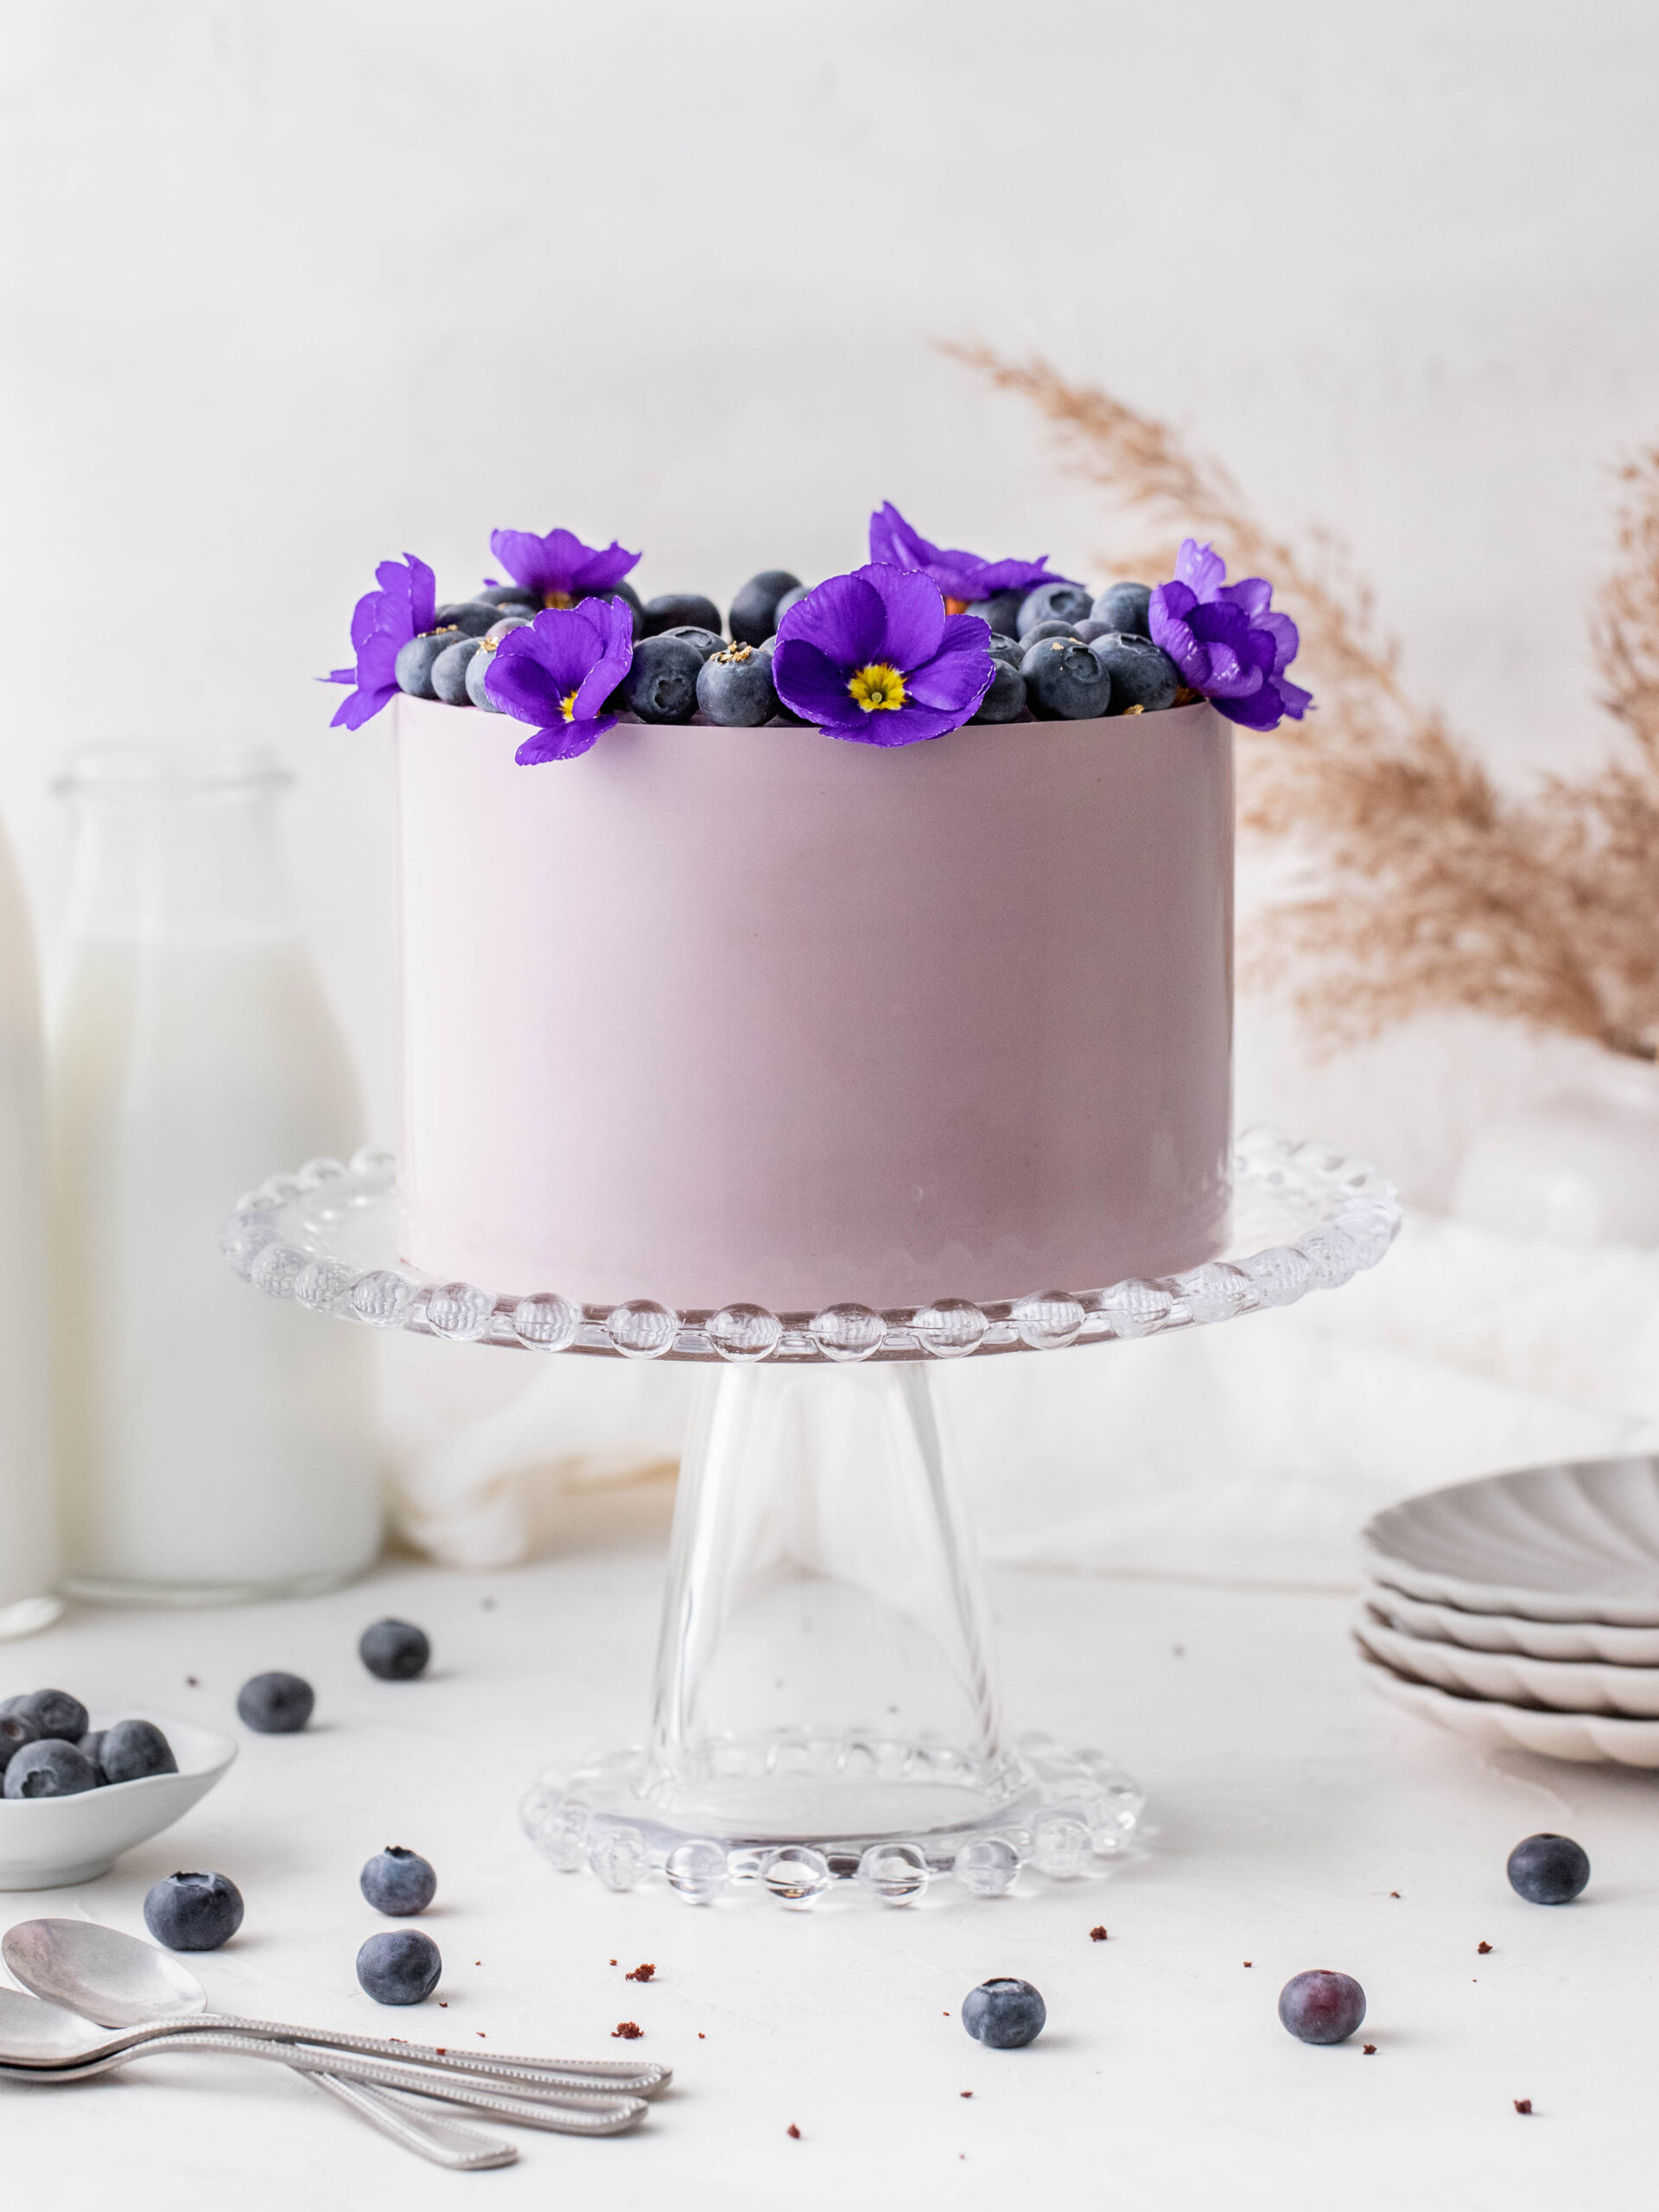 Blueberry Cream Cheese Chocolate Cake on a cake stand.